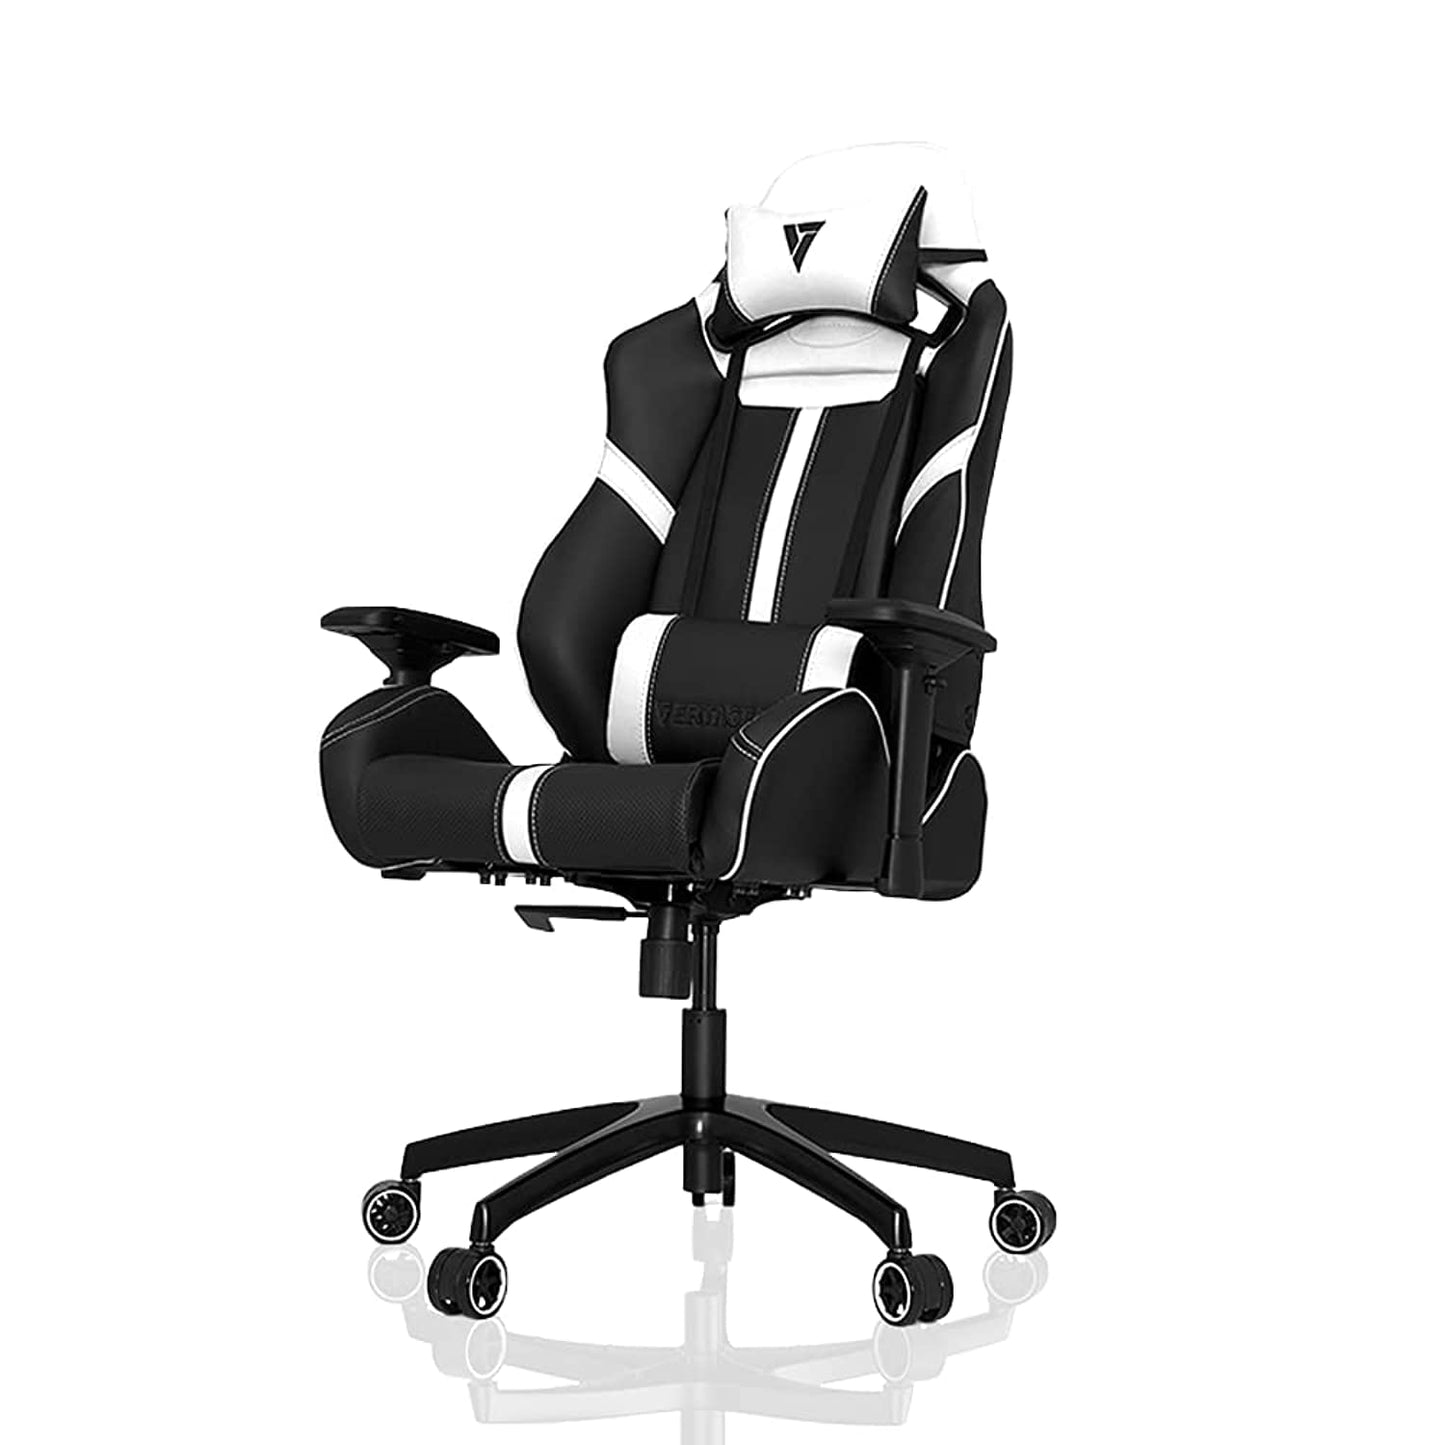 VERTAGEAR Racing Series S-Line SL5000 Gaming Chair Black/Carbon Edition, Large